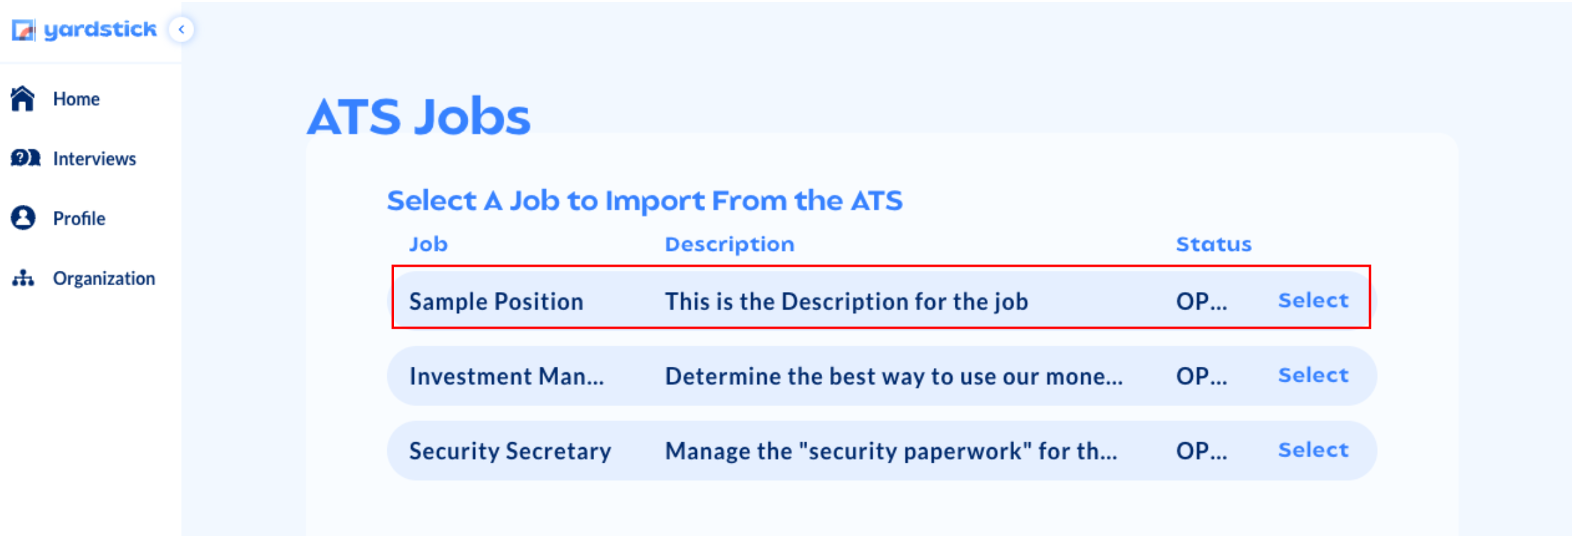 Yardstick ATS jobs page with job and description outlined